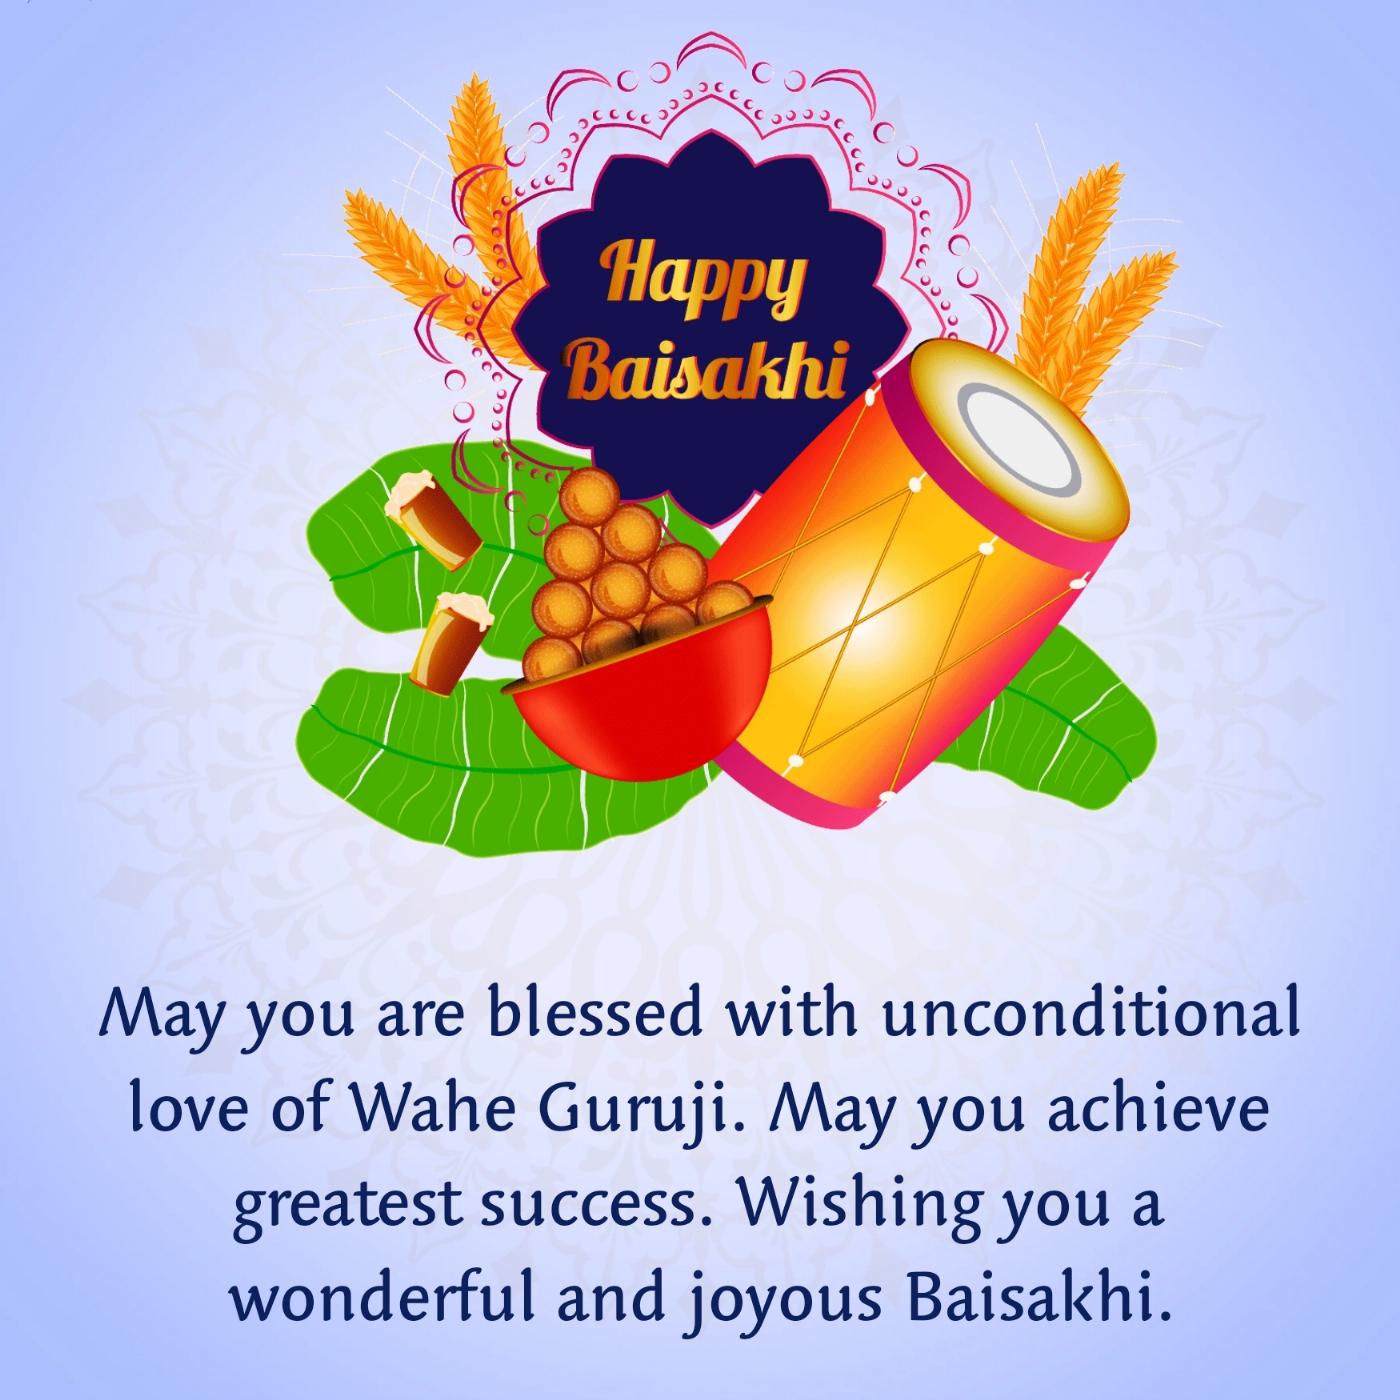 May you are blessed with unconditional love of Wahe Guruji